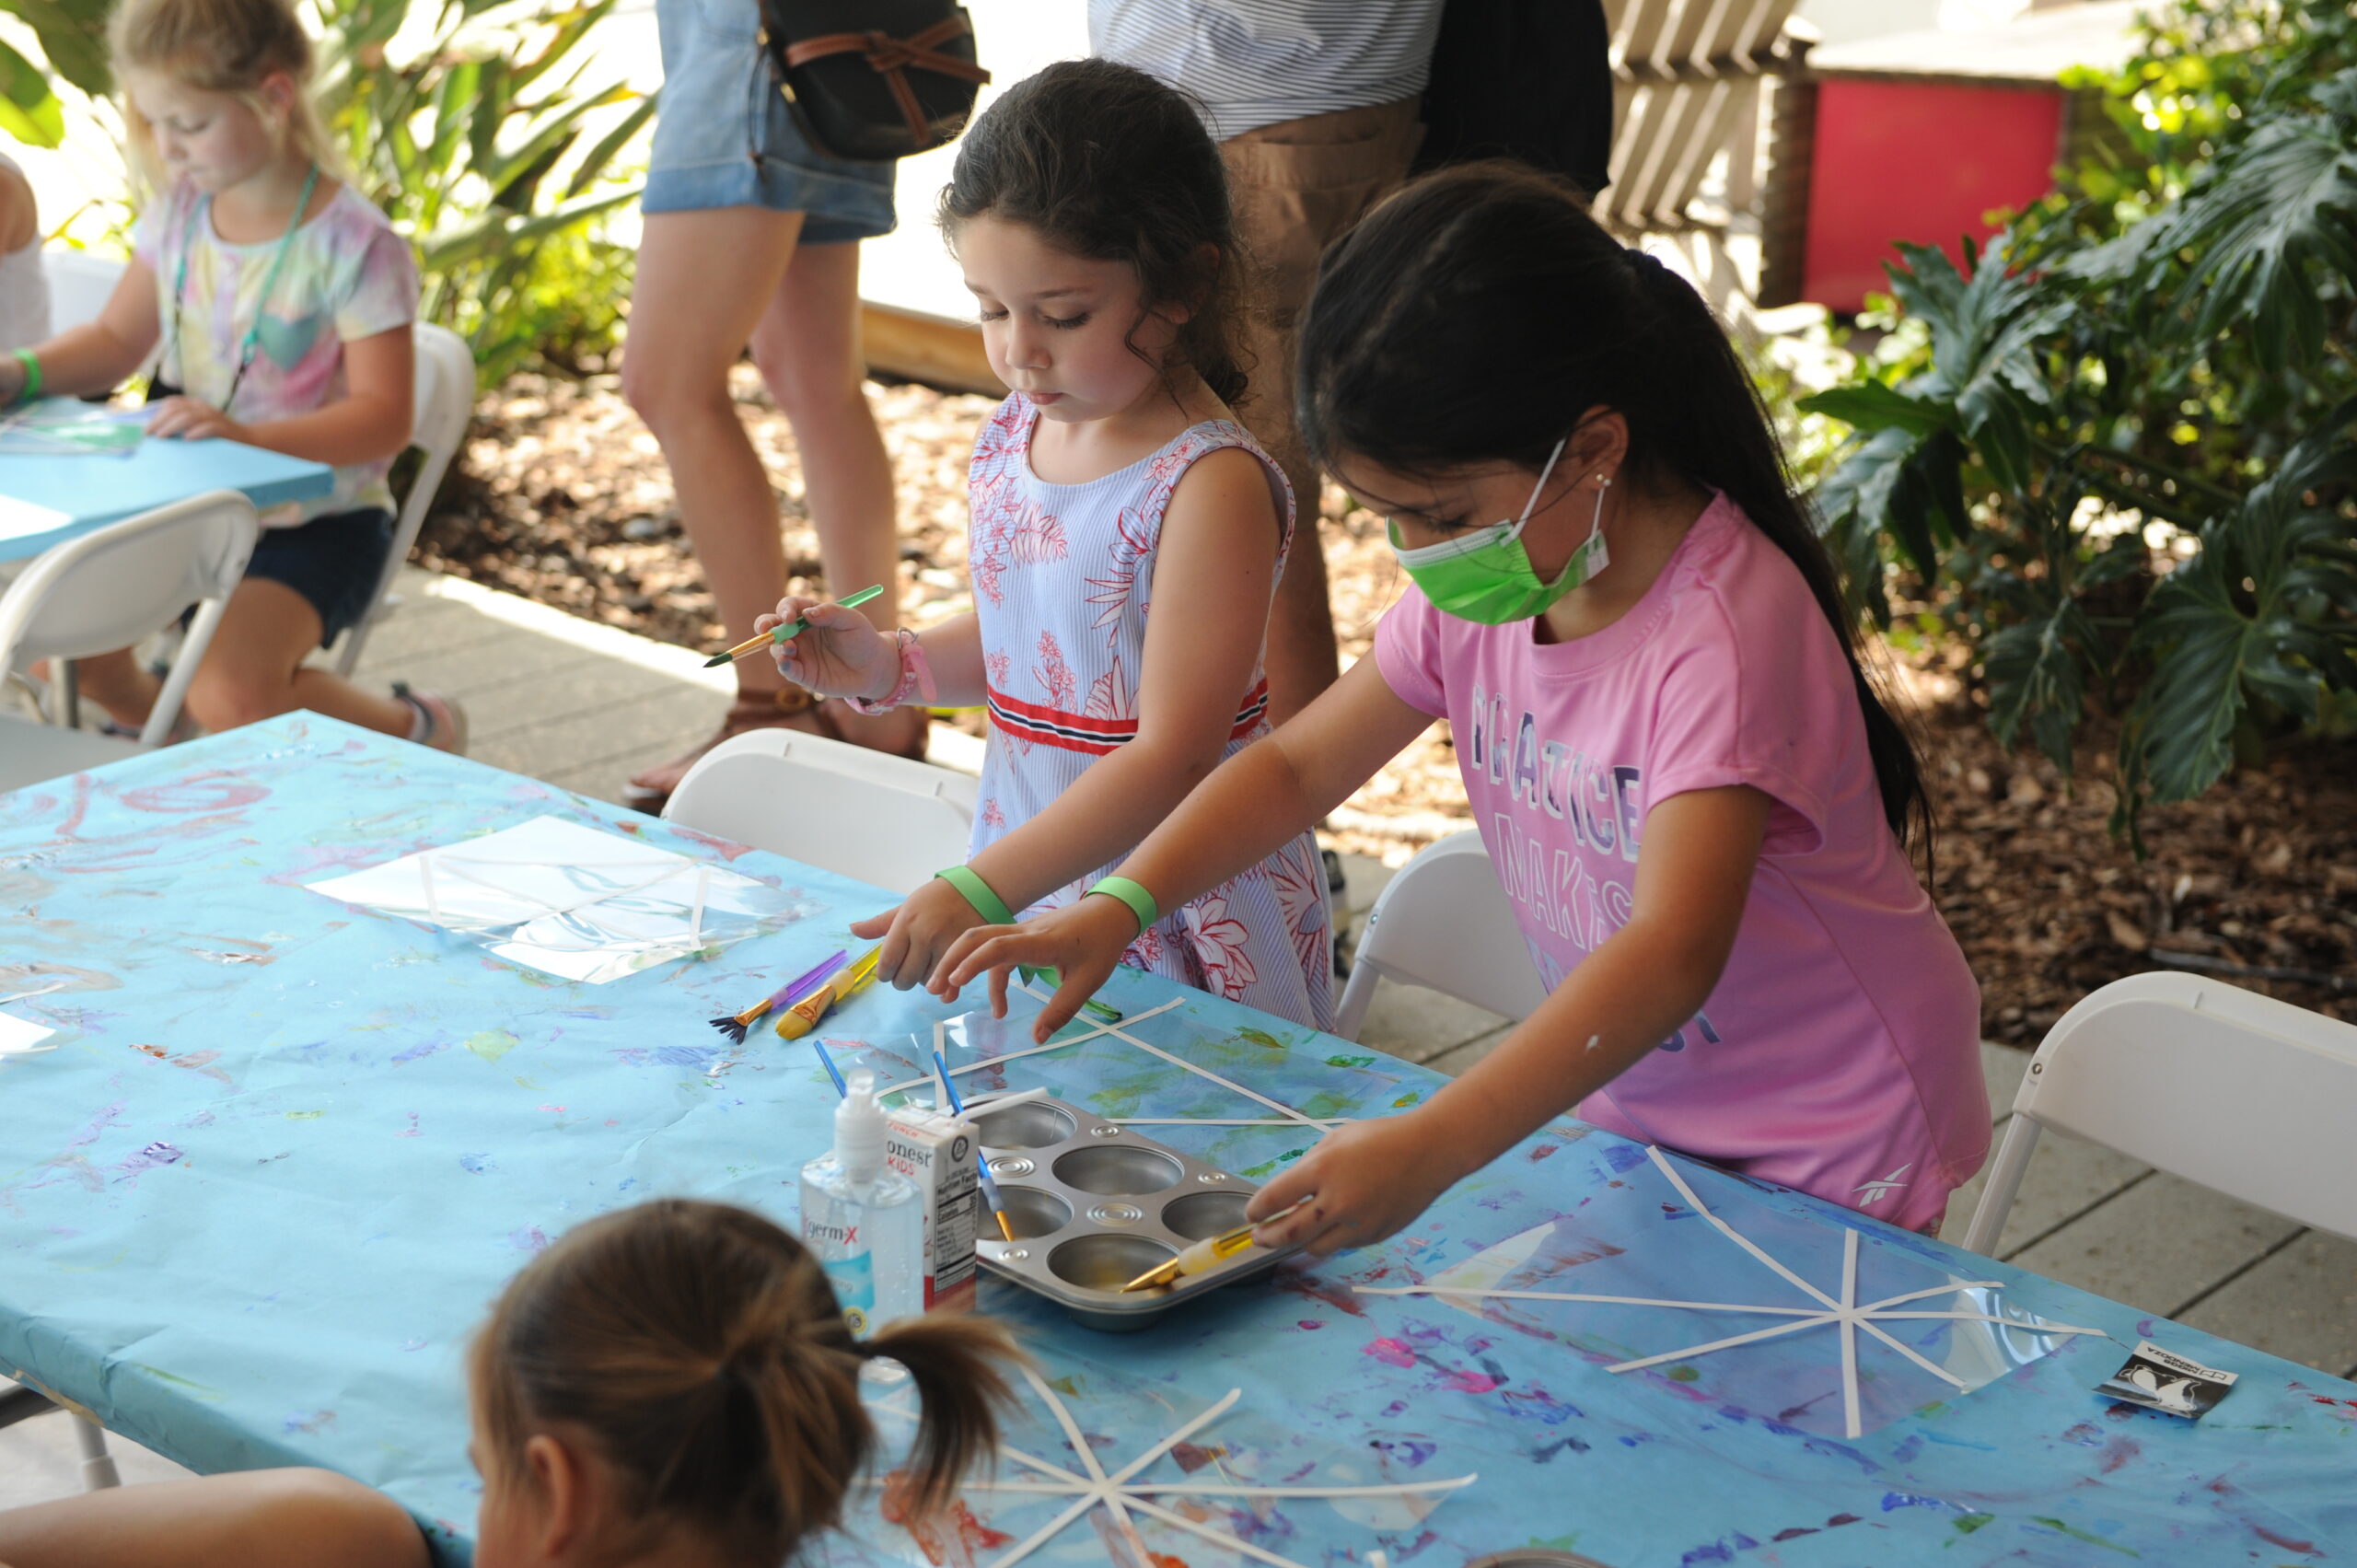 Children painting and making crafts